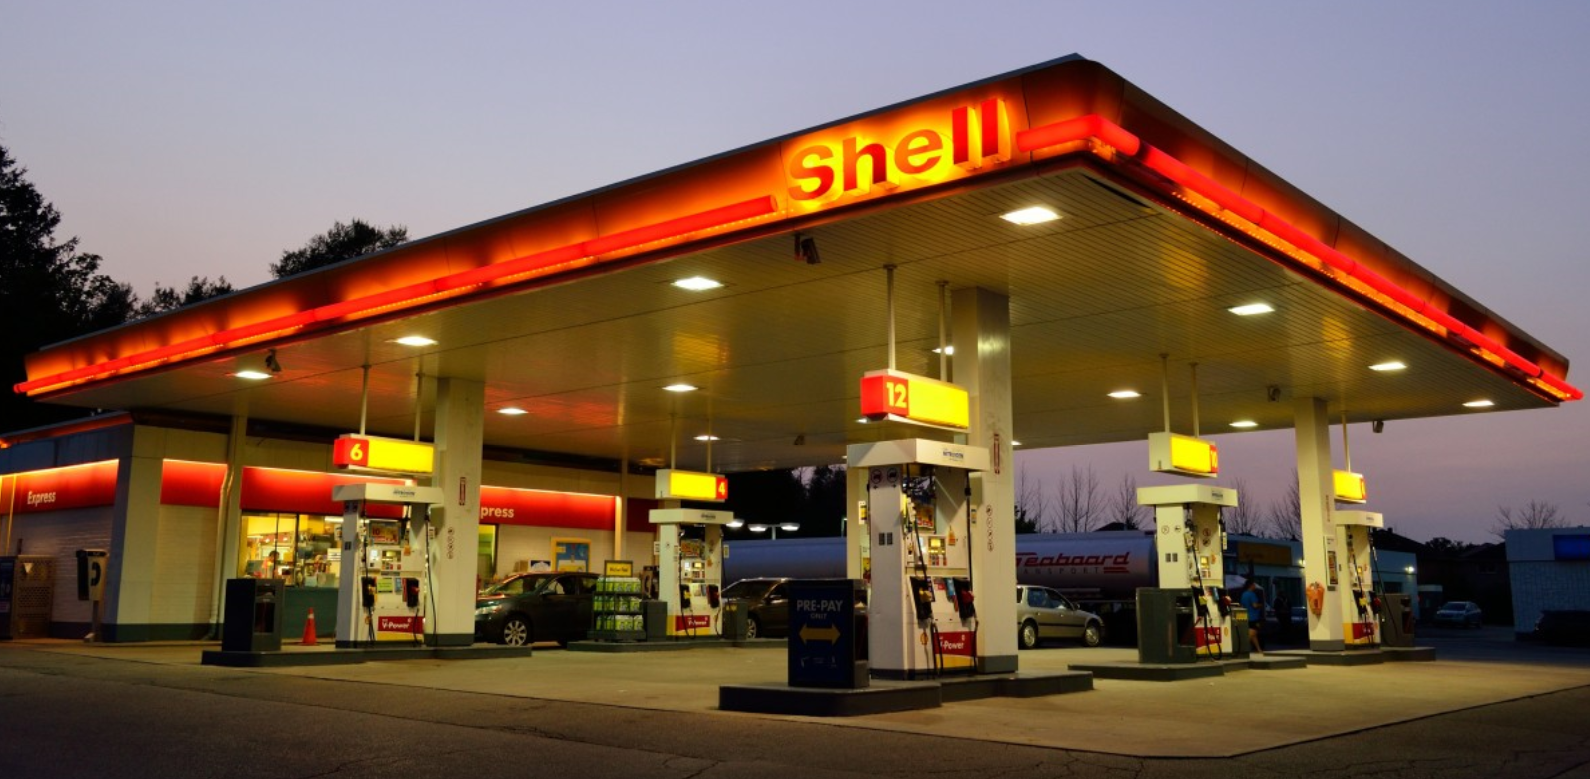 https://thebulletin.org/wp-content/uploads/2020/09/Shell-gas-station-lg-150x150.png